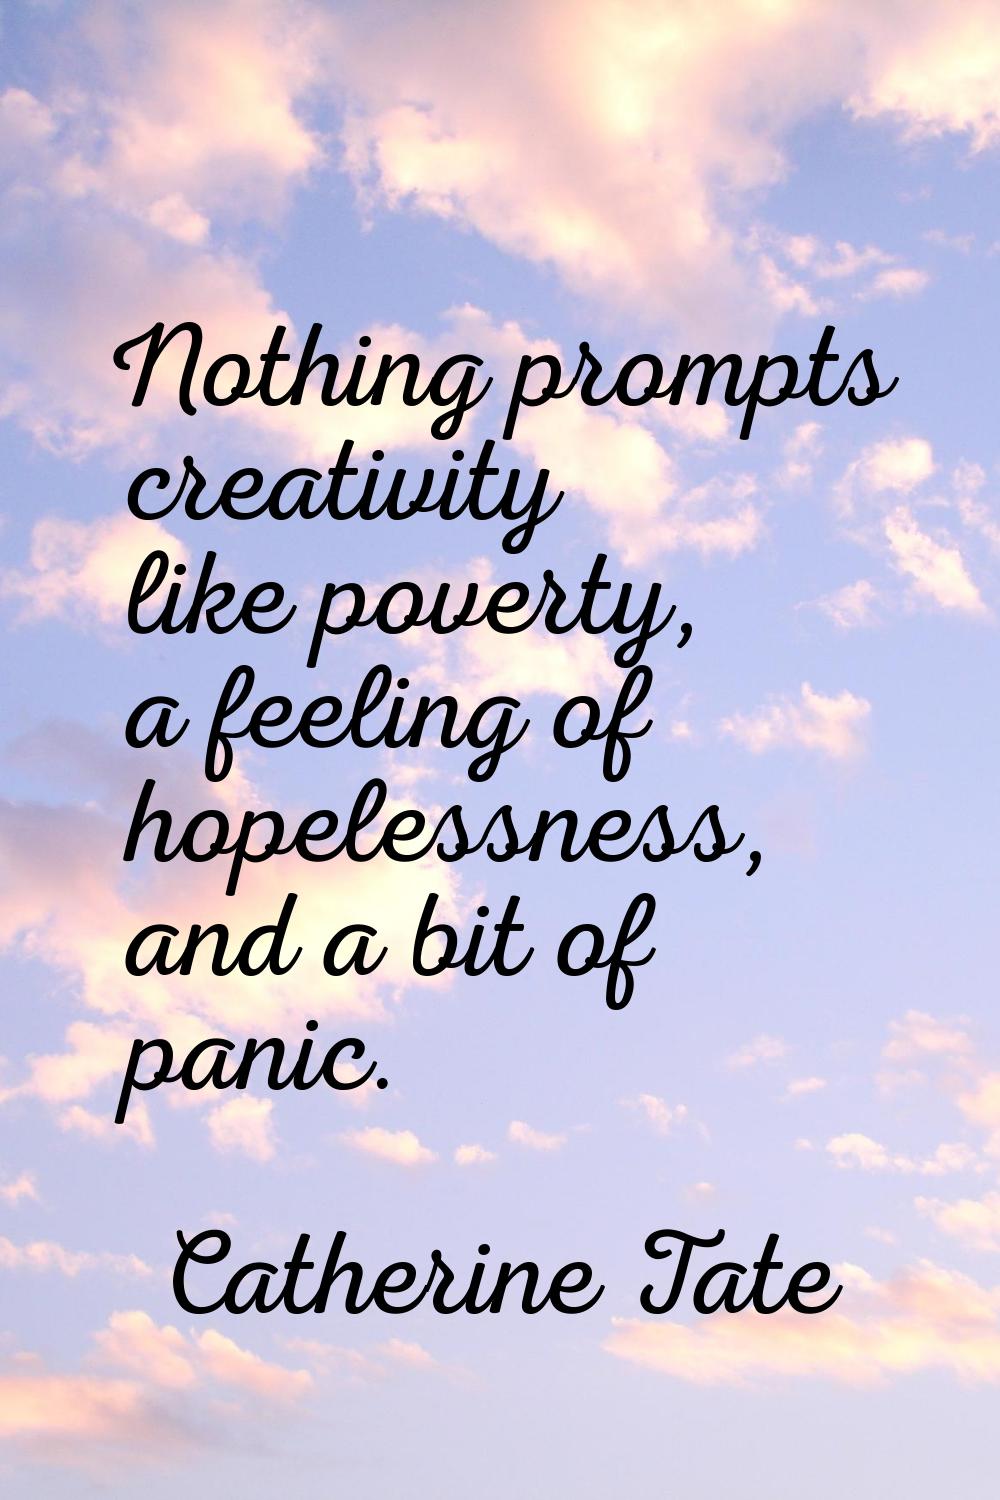 Nothing prompts creativity like poverty, a feeling of hopelessness, and a bit of panic.